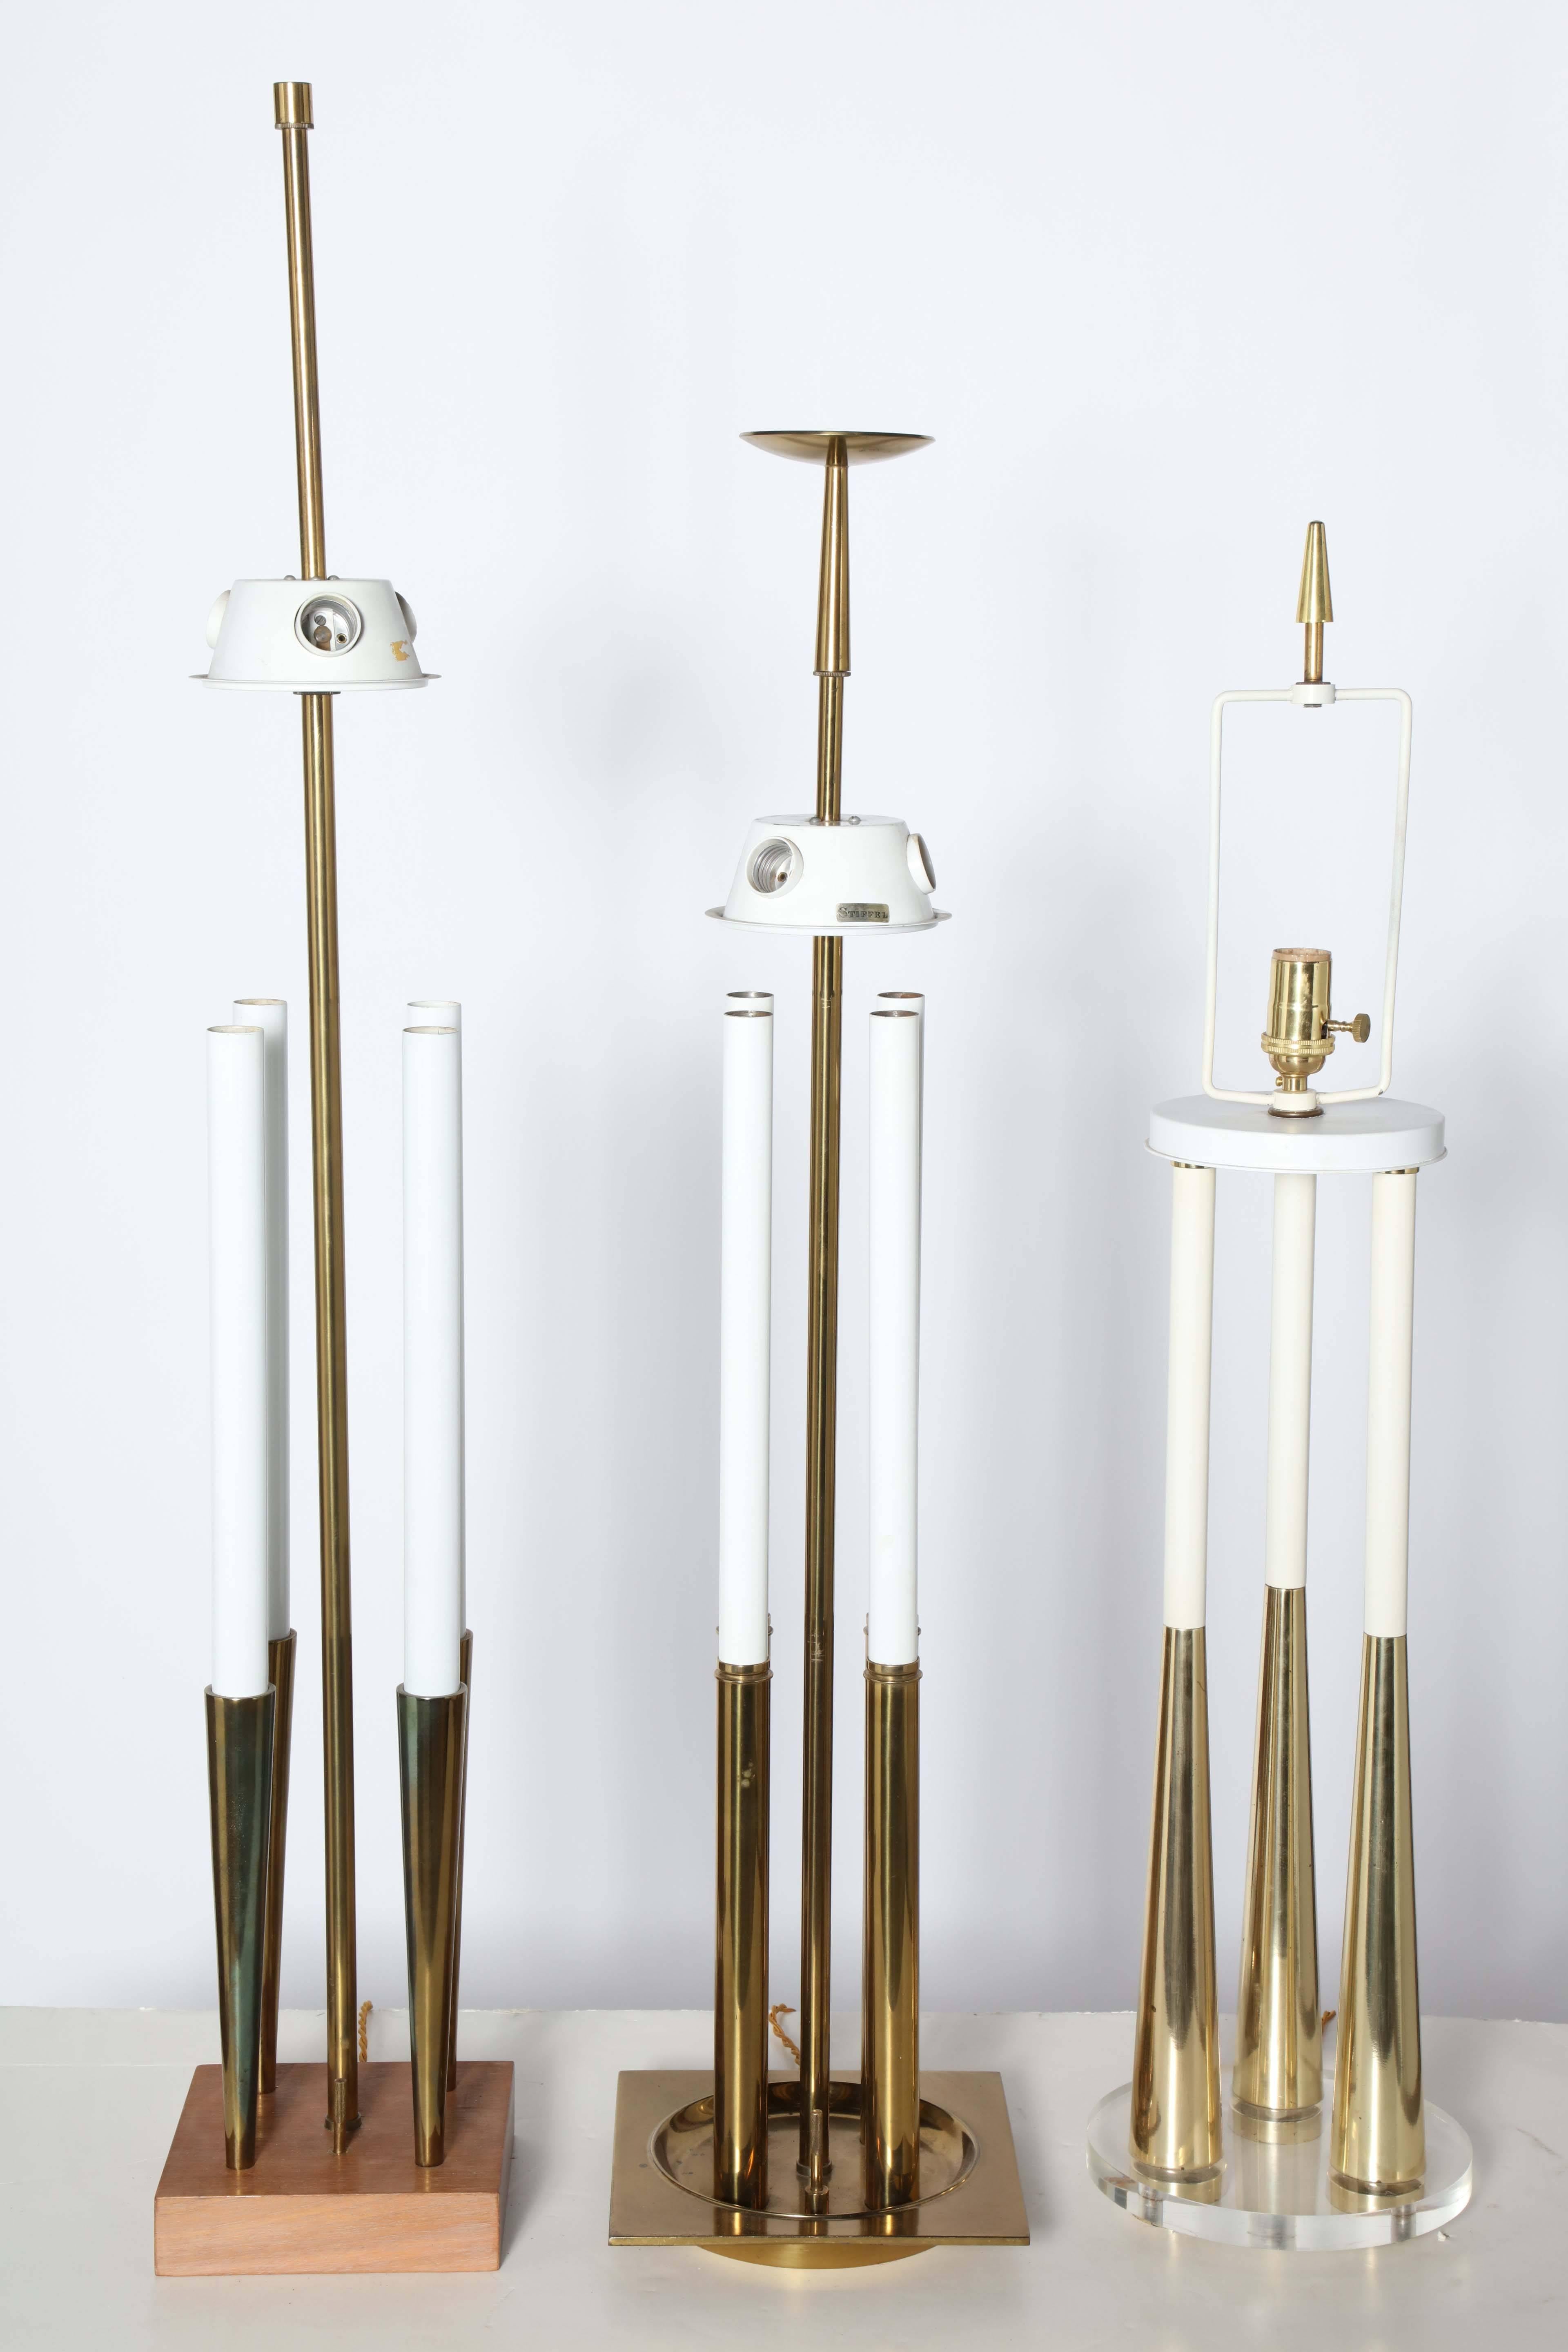 Mid-20th Century Monumental Stiffel Lamp Co. Candlestick Table Lamps, Tommi Parzinger Style 